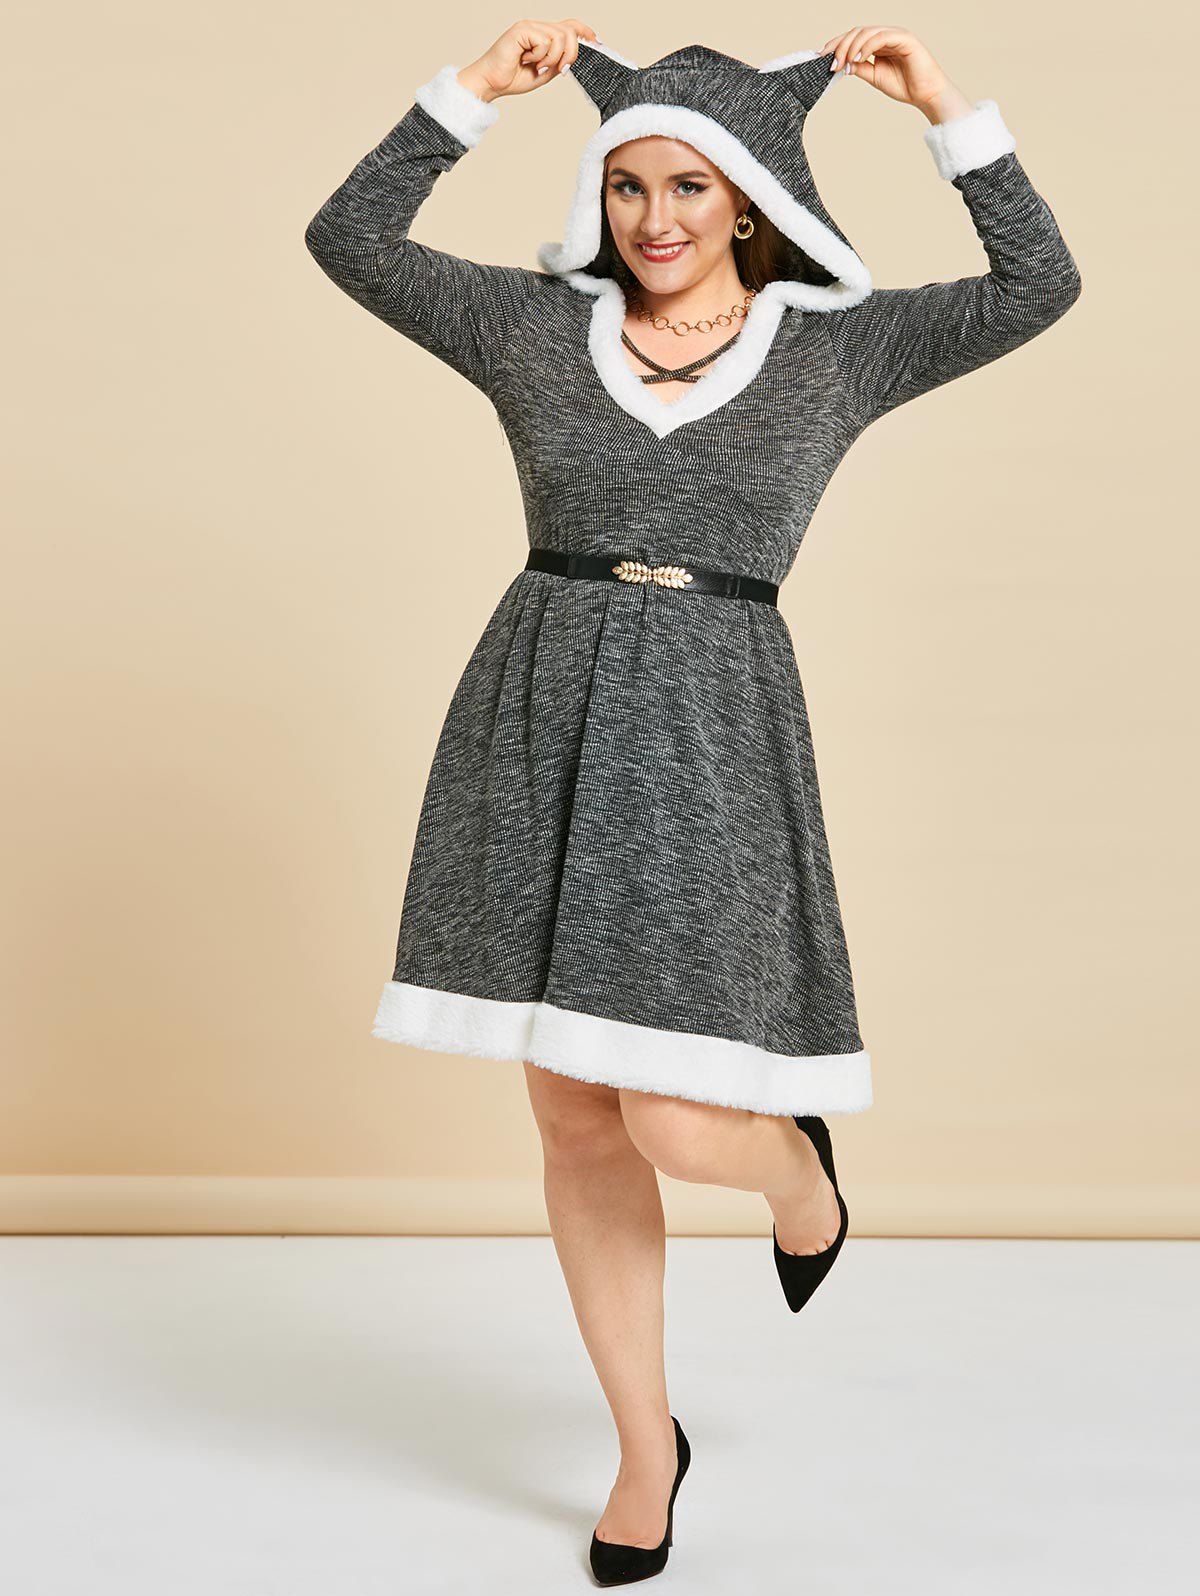 Plus Size Cat Ear Hooded Marled Knit A Line Dress - CARBON GRAY 4X